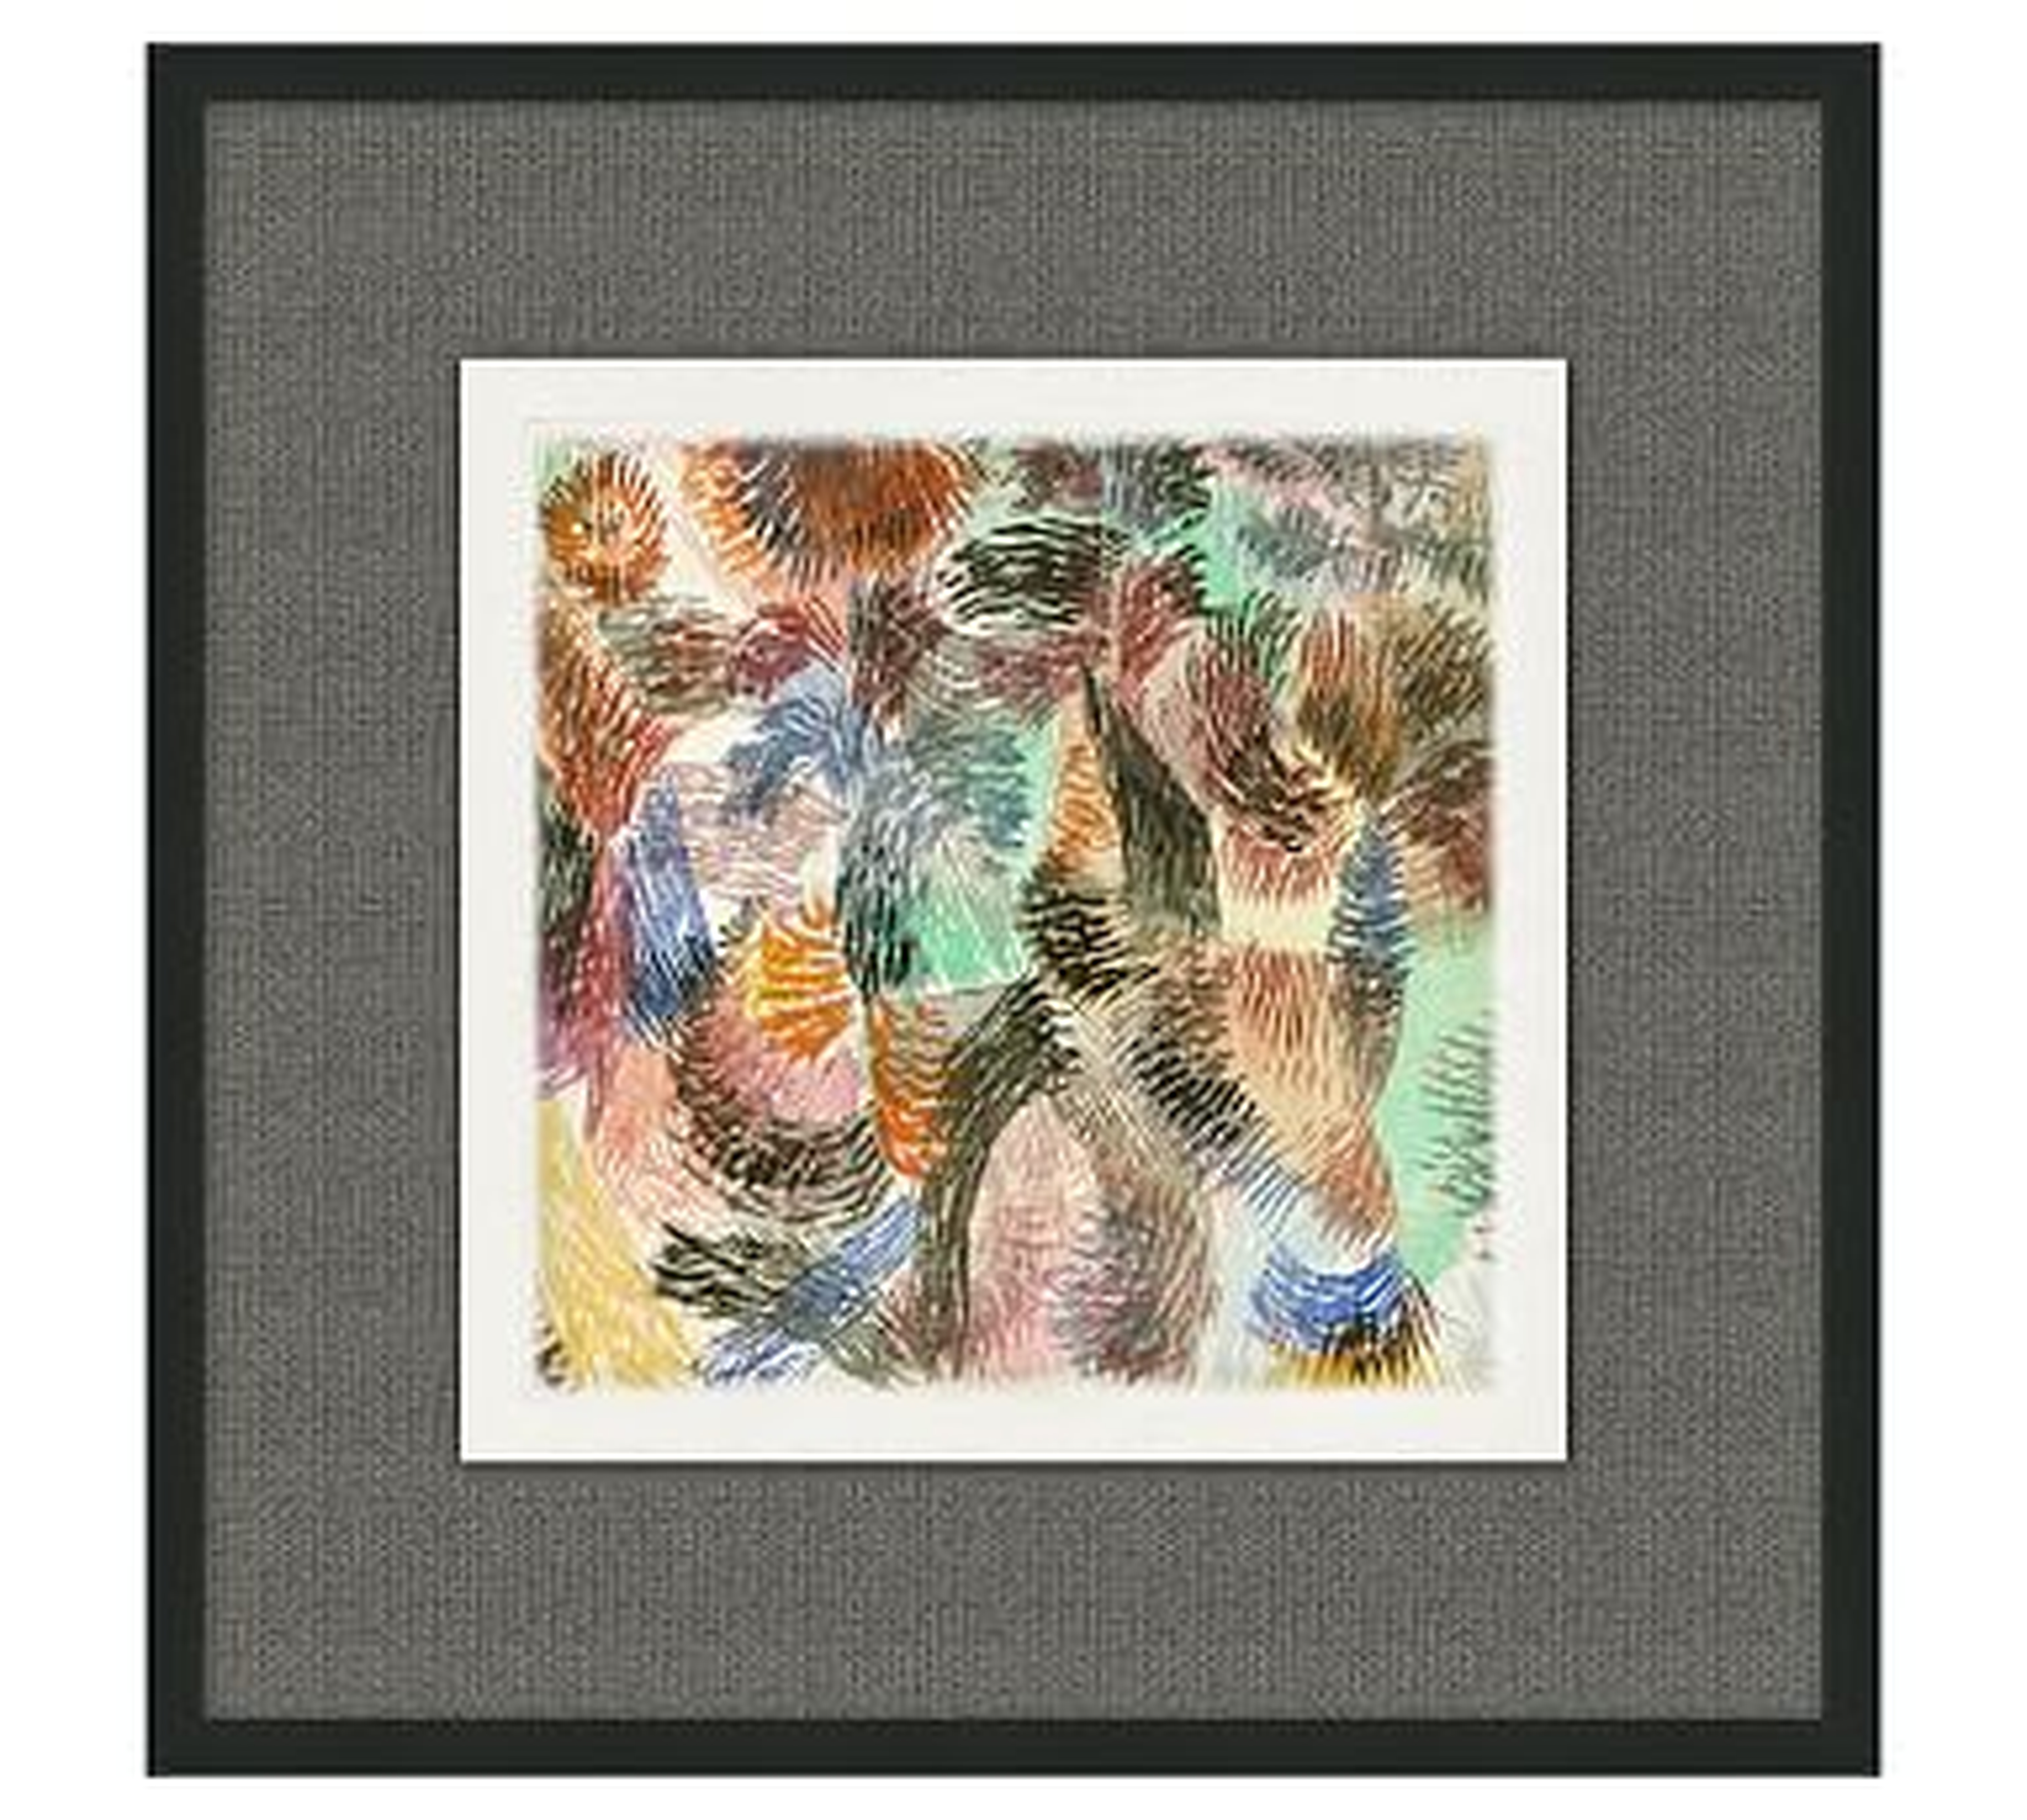 Colored Crosshatch Framed Print, 22" x 22" - Pottery Barn